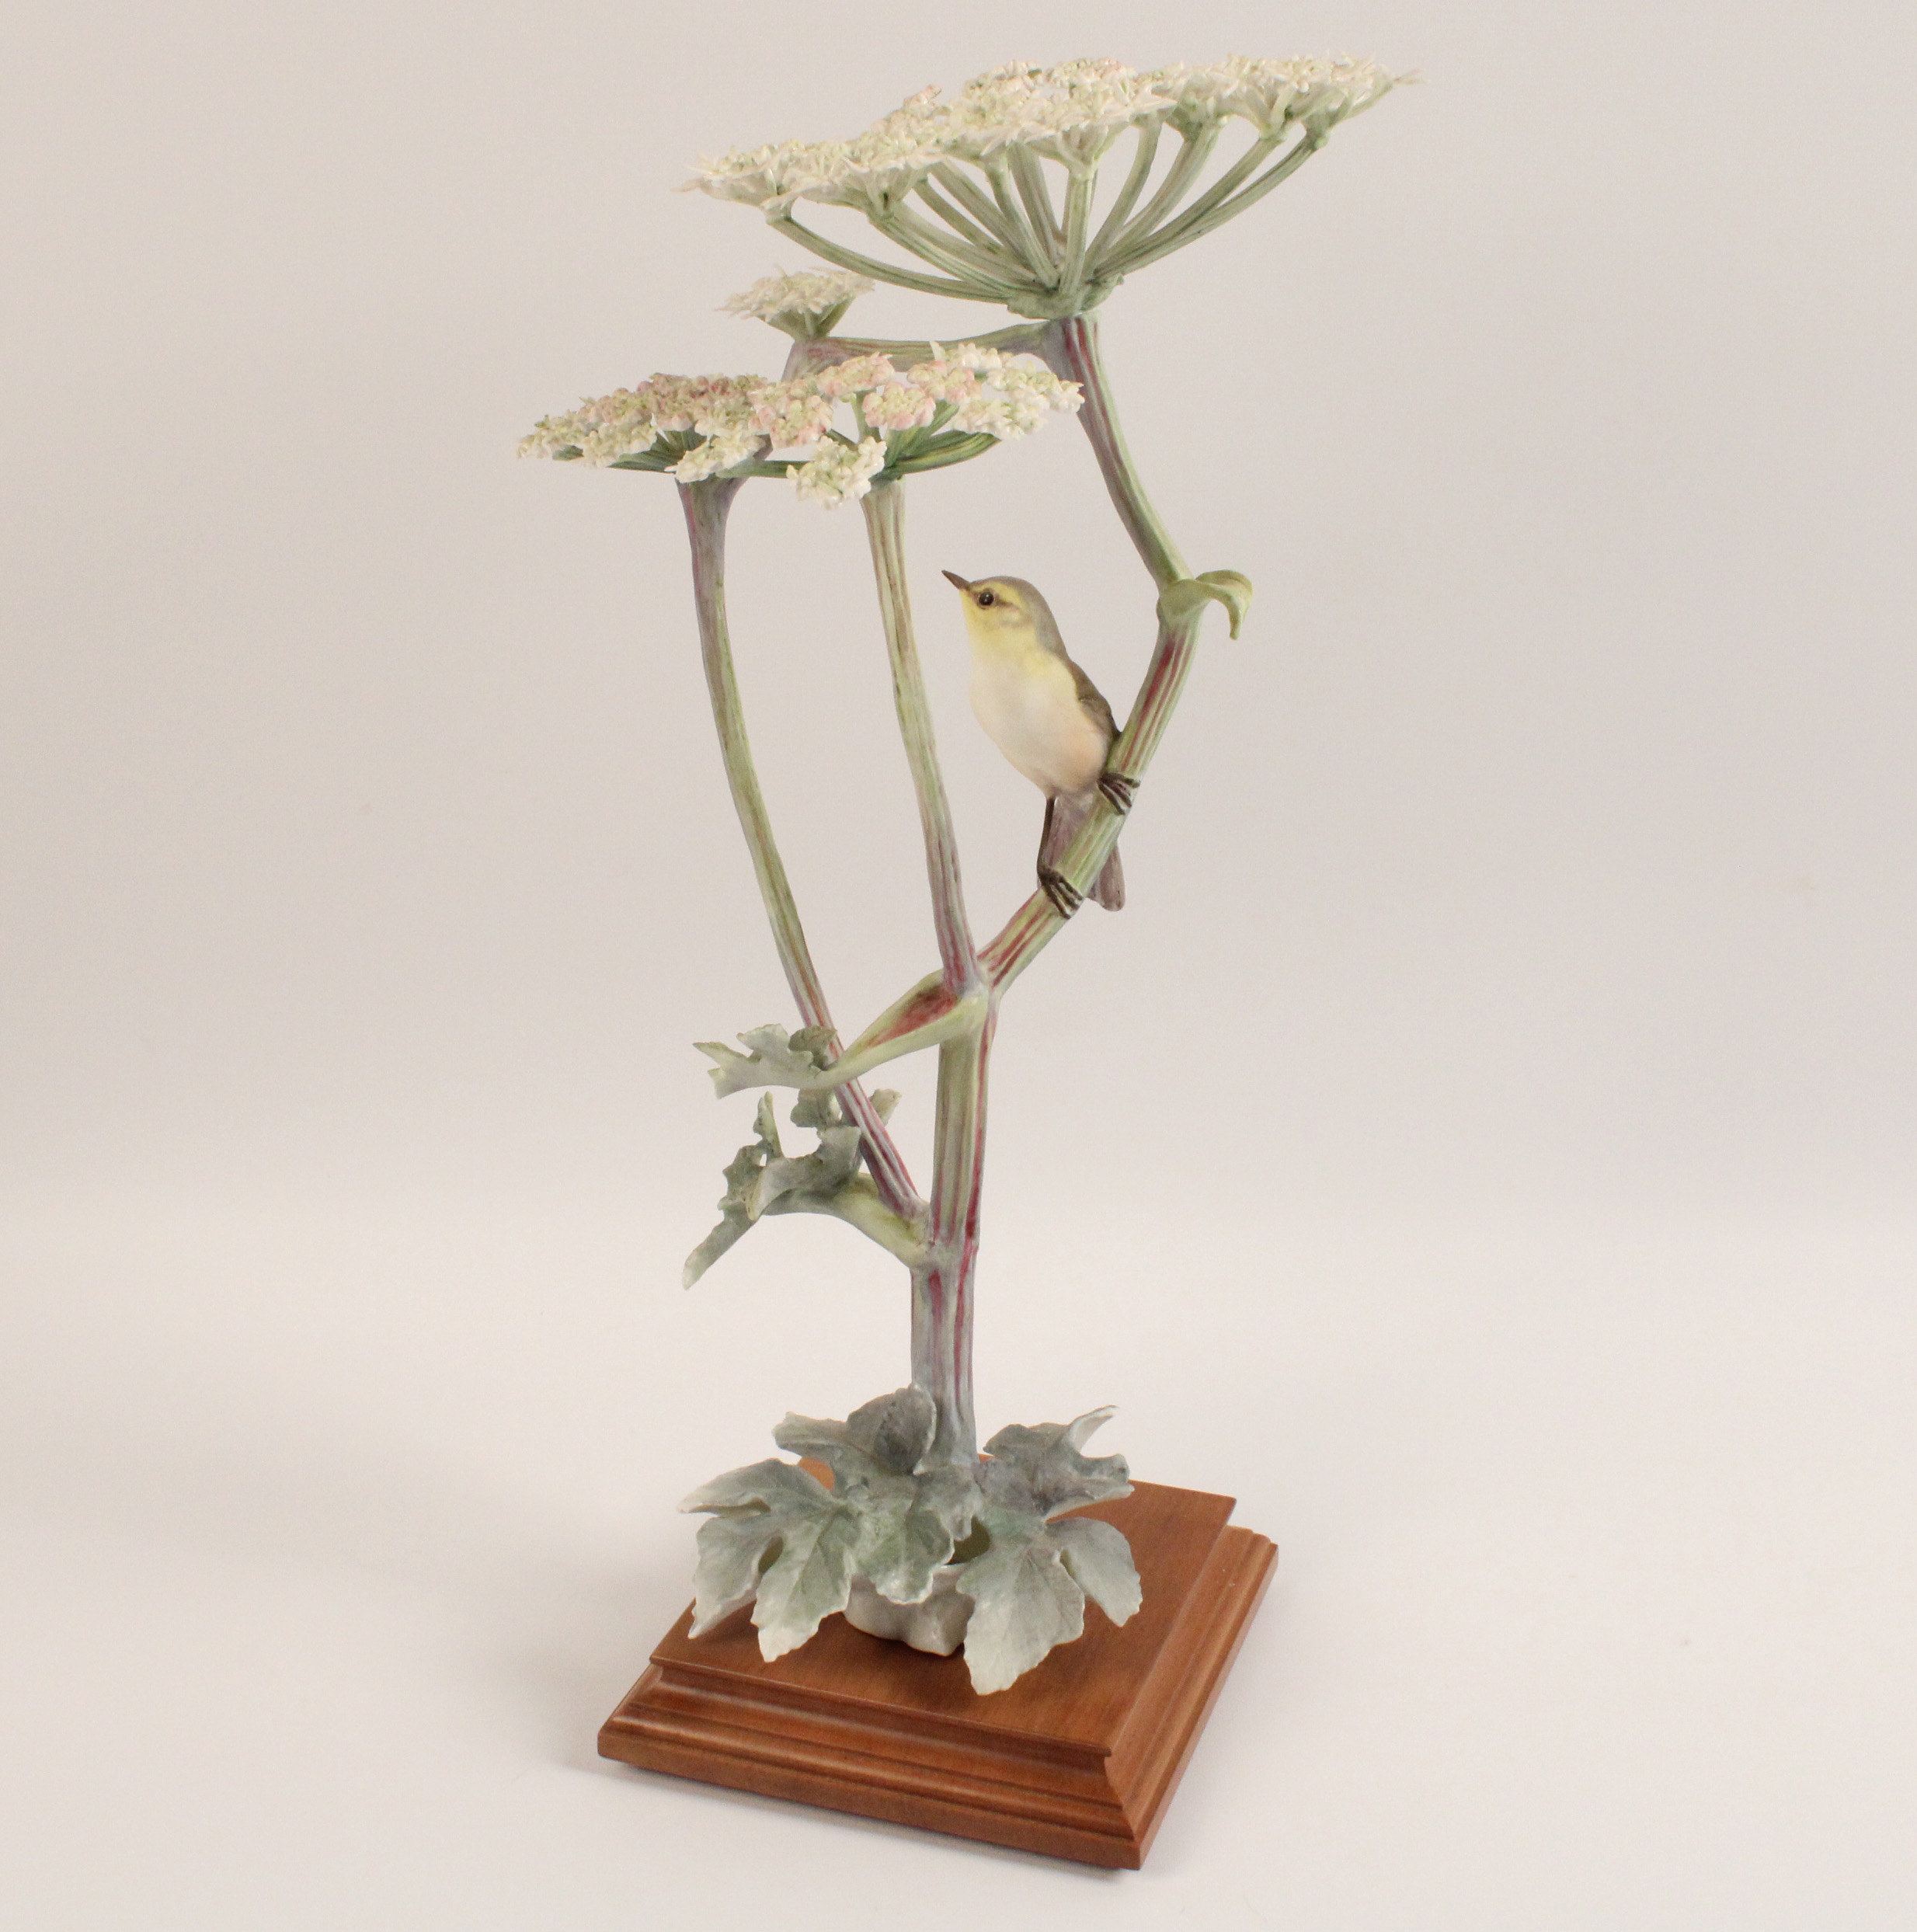 CHIFF CHAFF AND HOGWEED BY DOROTHY